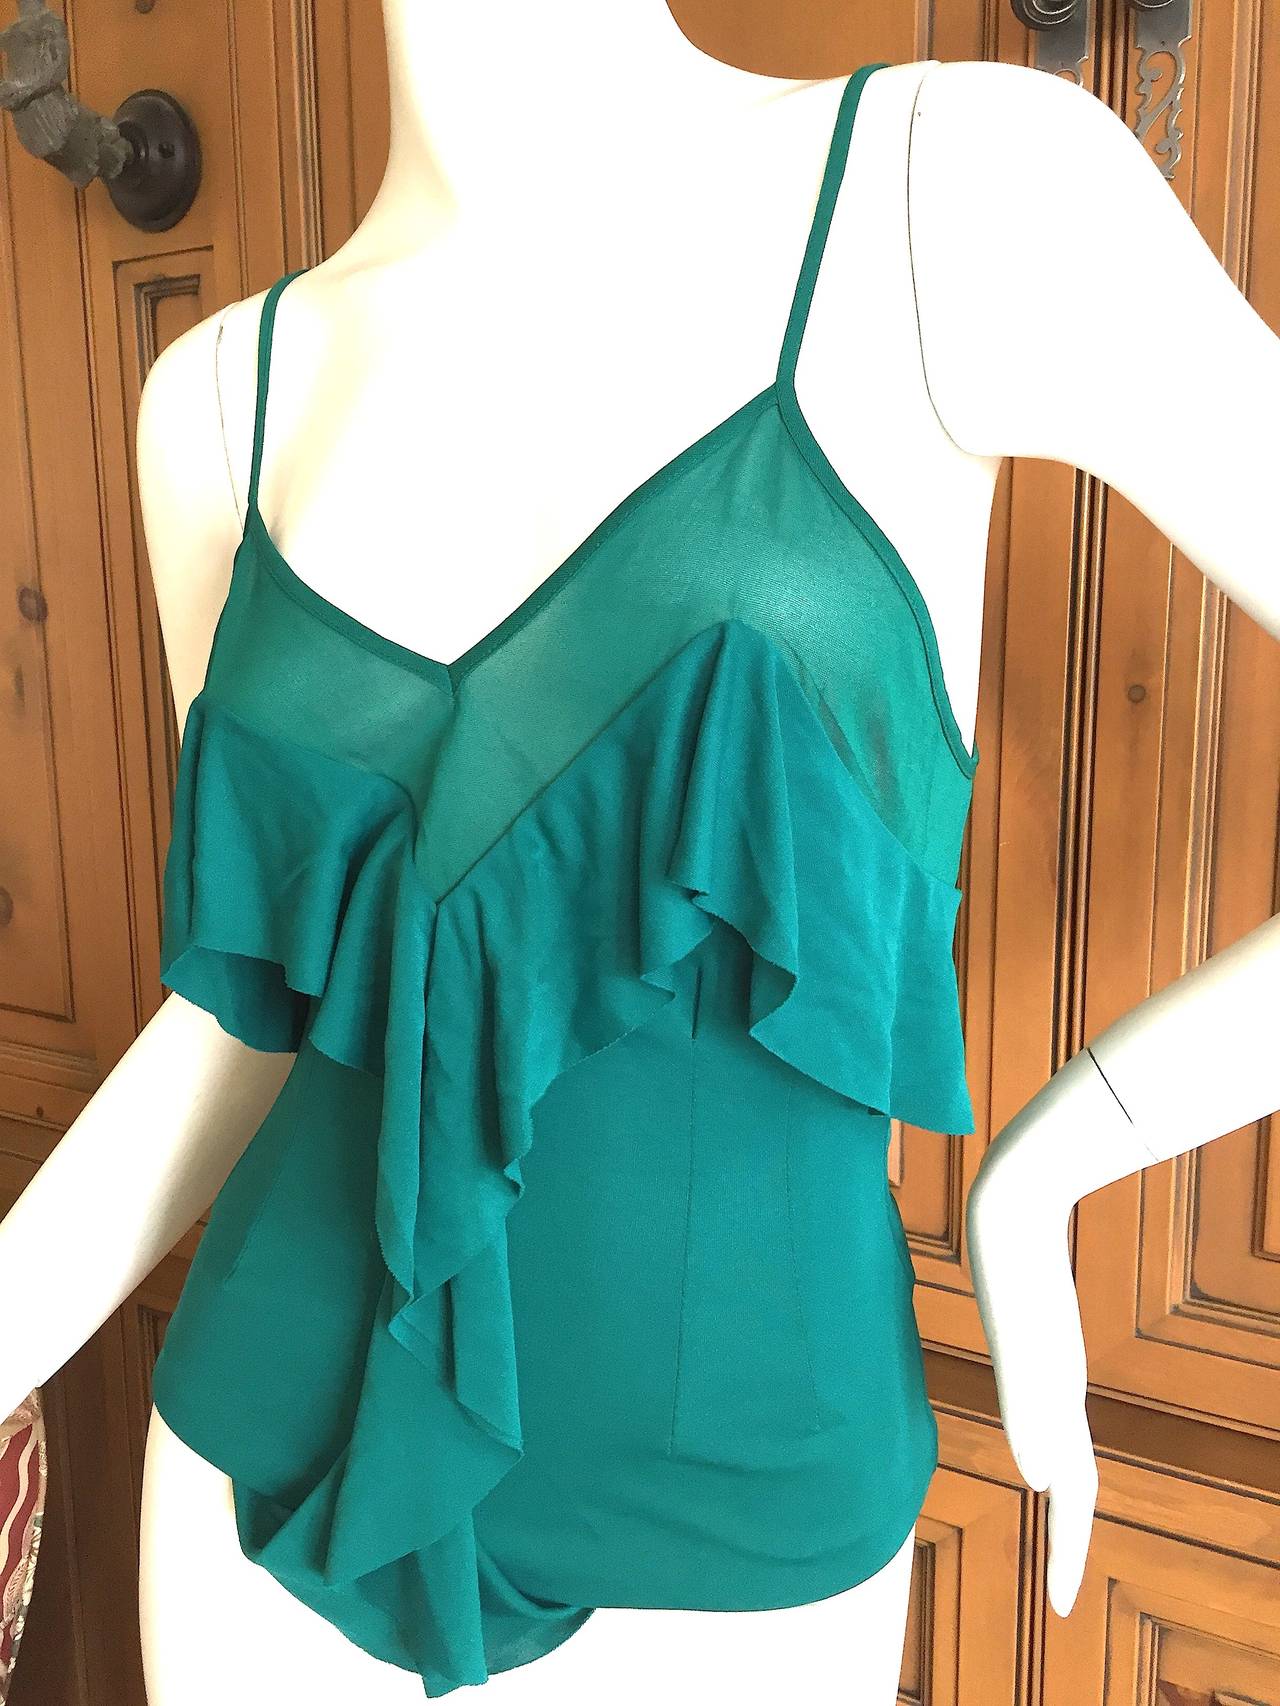 Yves Saint Laurent by Tom Ford 2002 Silk Ruffle Top.
New with Tags , sz M
Bust 36